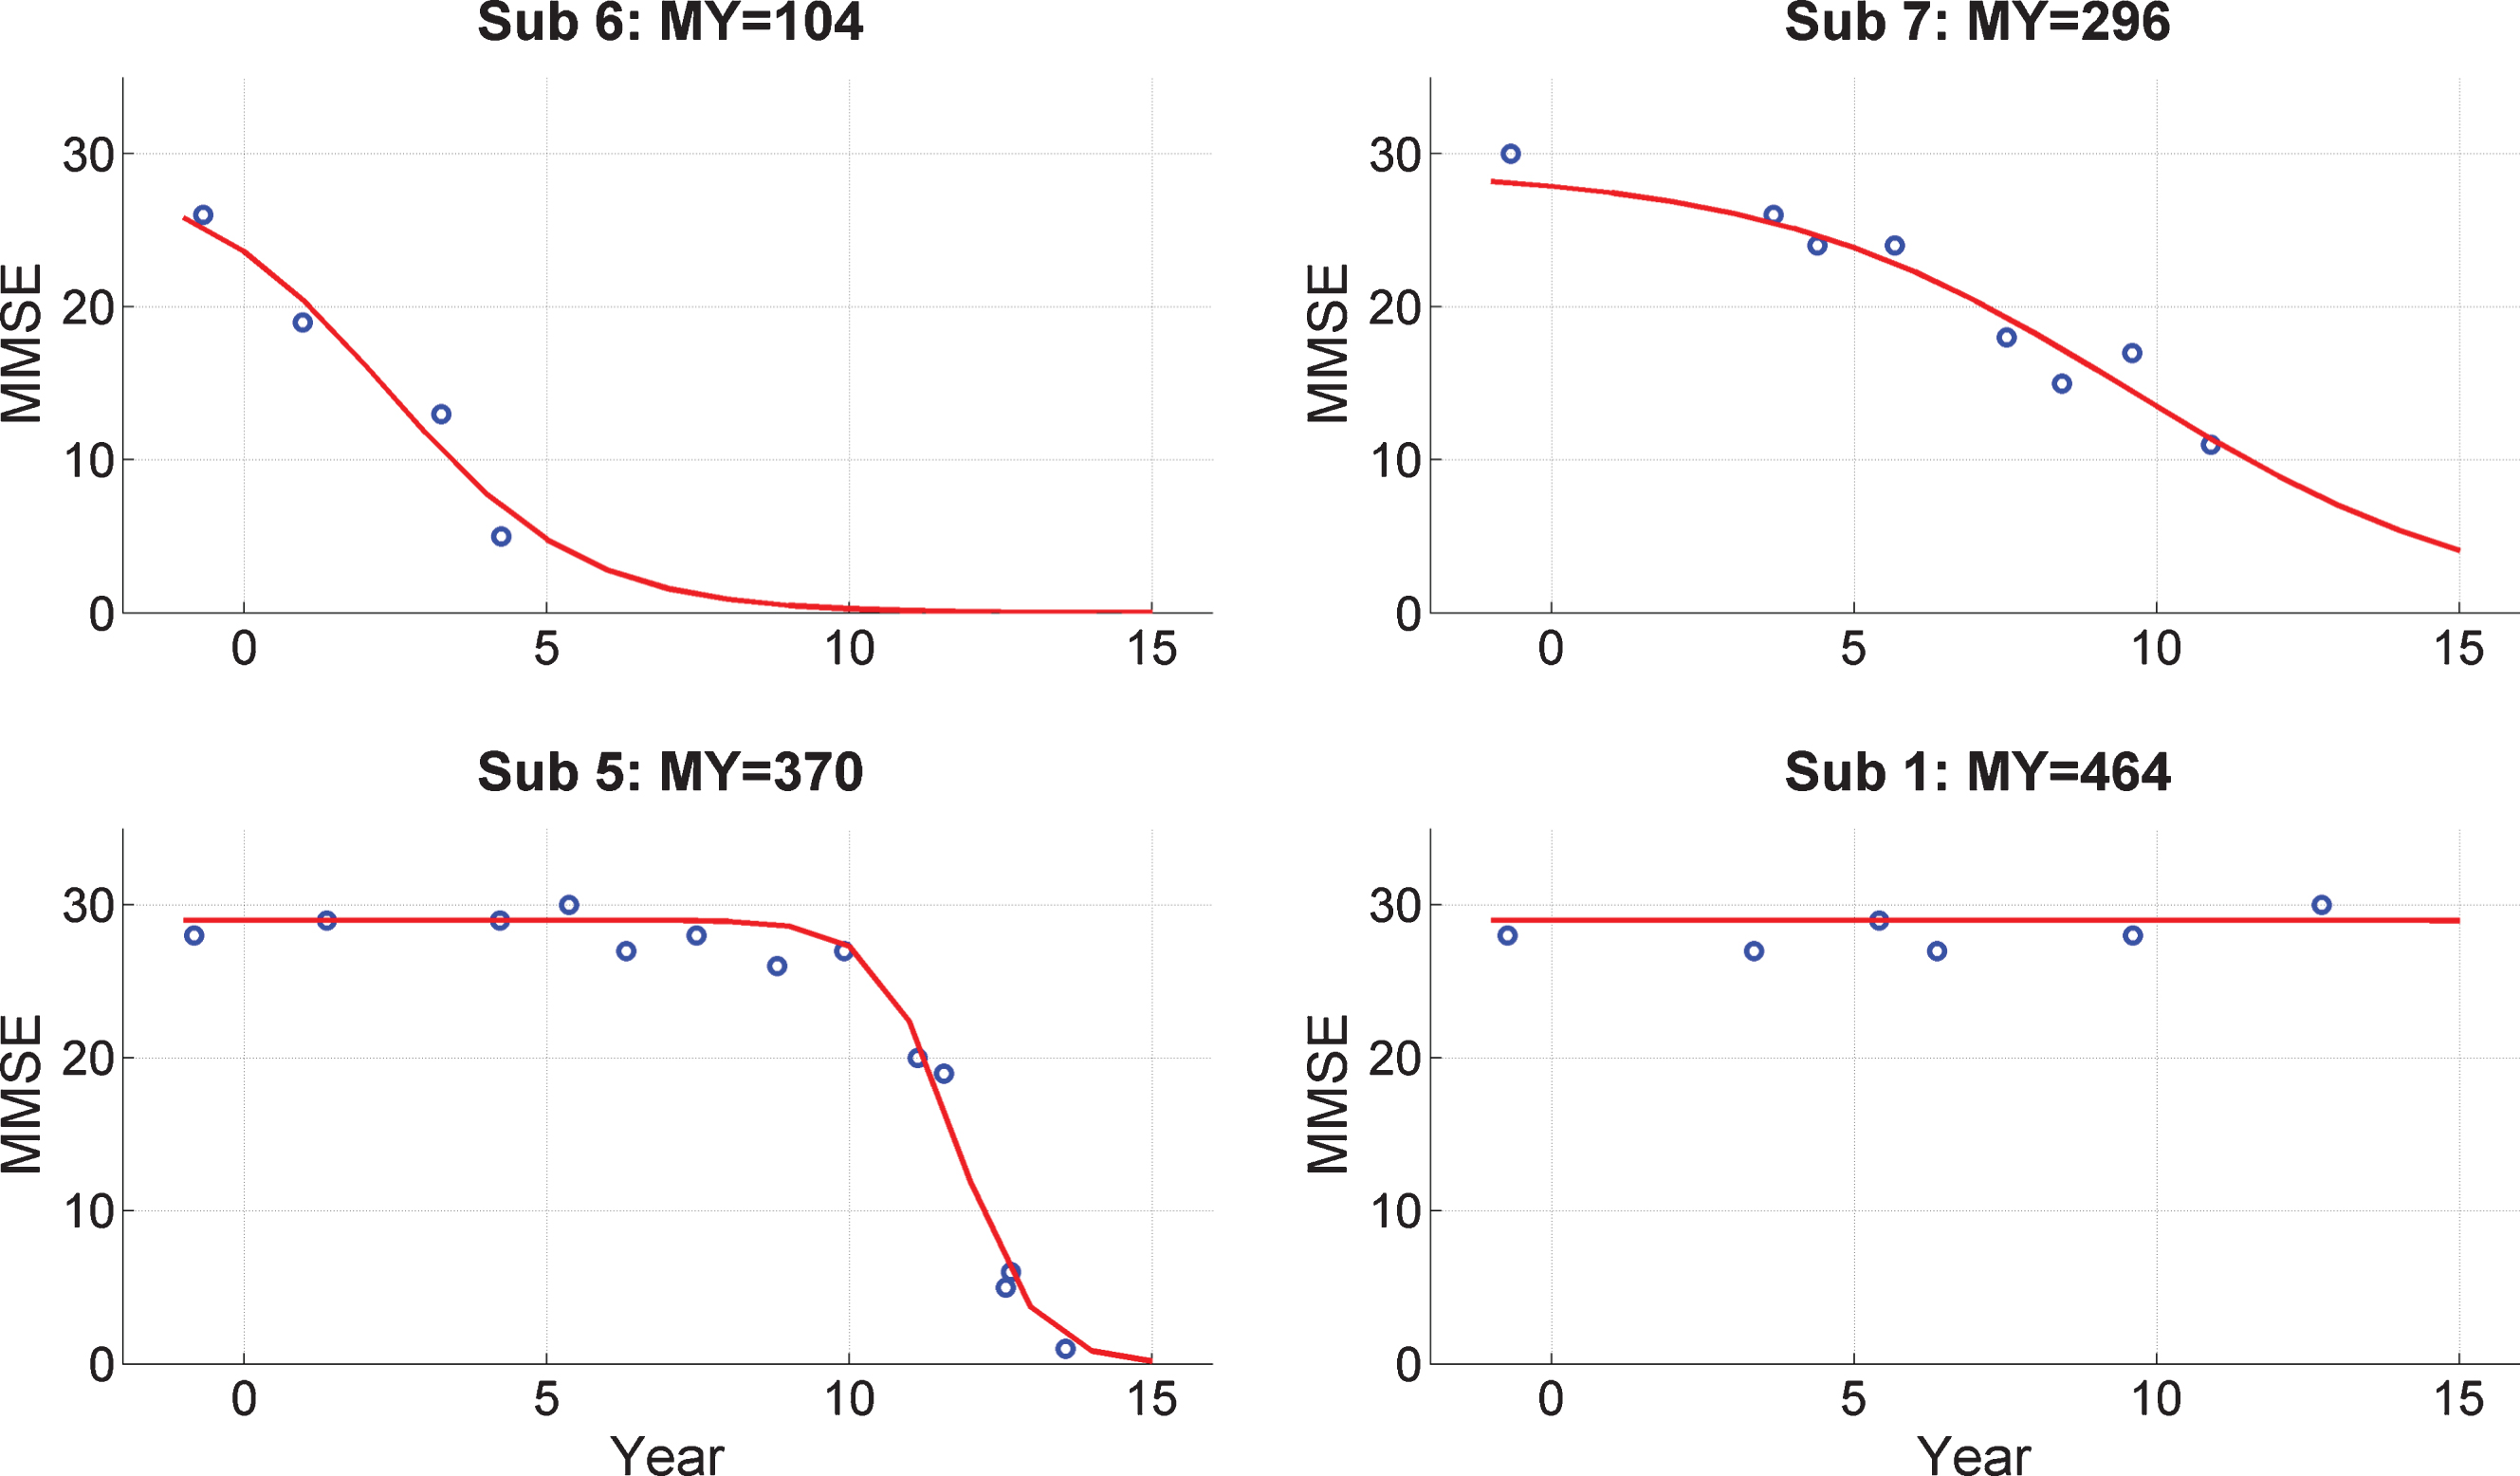 Trajectories of Mini-Mental State Exam (MMSE) scores. MMSE trajectories during follow-up period for 4 subjects from the PreC group. The x-axis labels Year with 0 corresponding to 2000. The EEG data were acquired in 1999. Blue dots denote empirical MMSE scores and the red line indicates the trajectory estimated using a logistic decay model. The MY values above each plot correspond to MMSE-Years, computed as the integral under the curve. References to color relate to the online version of this article.